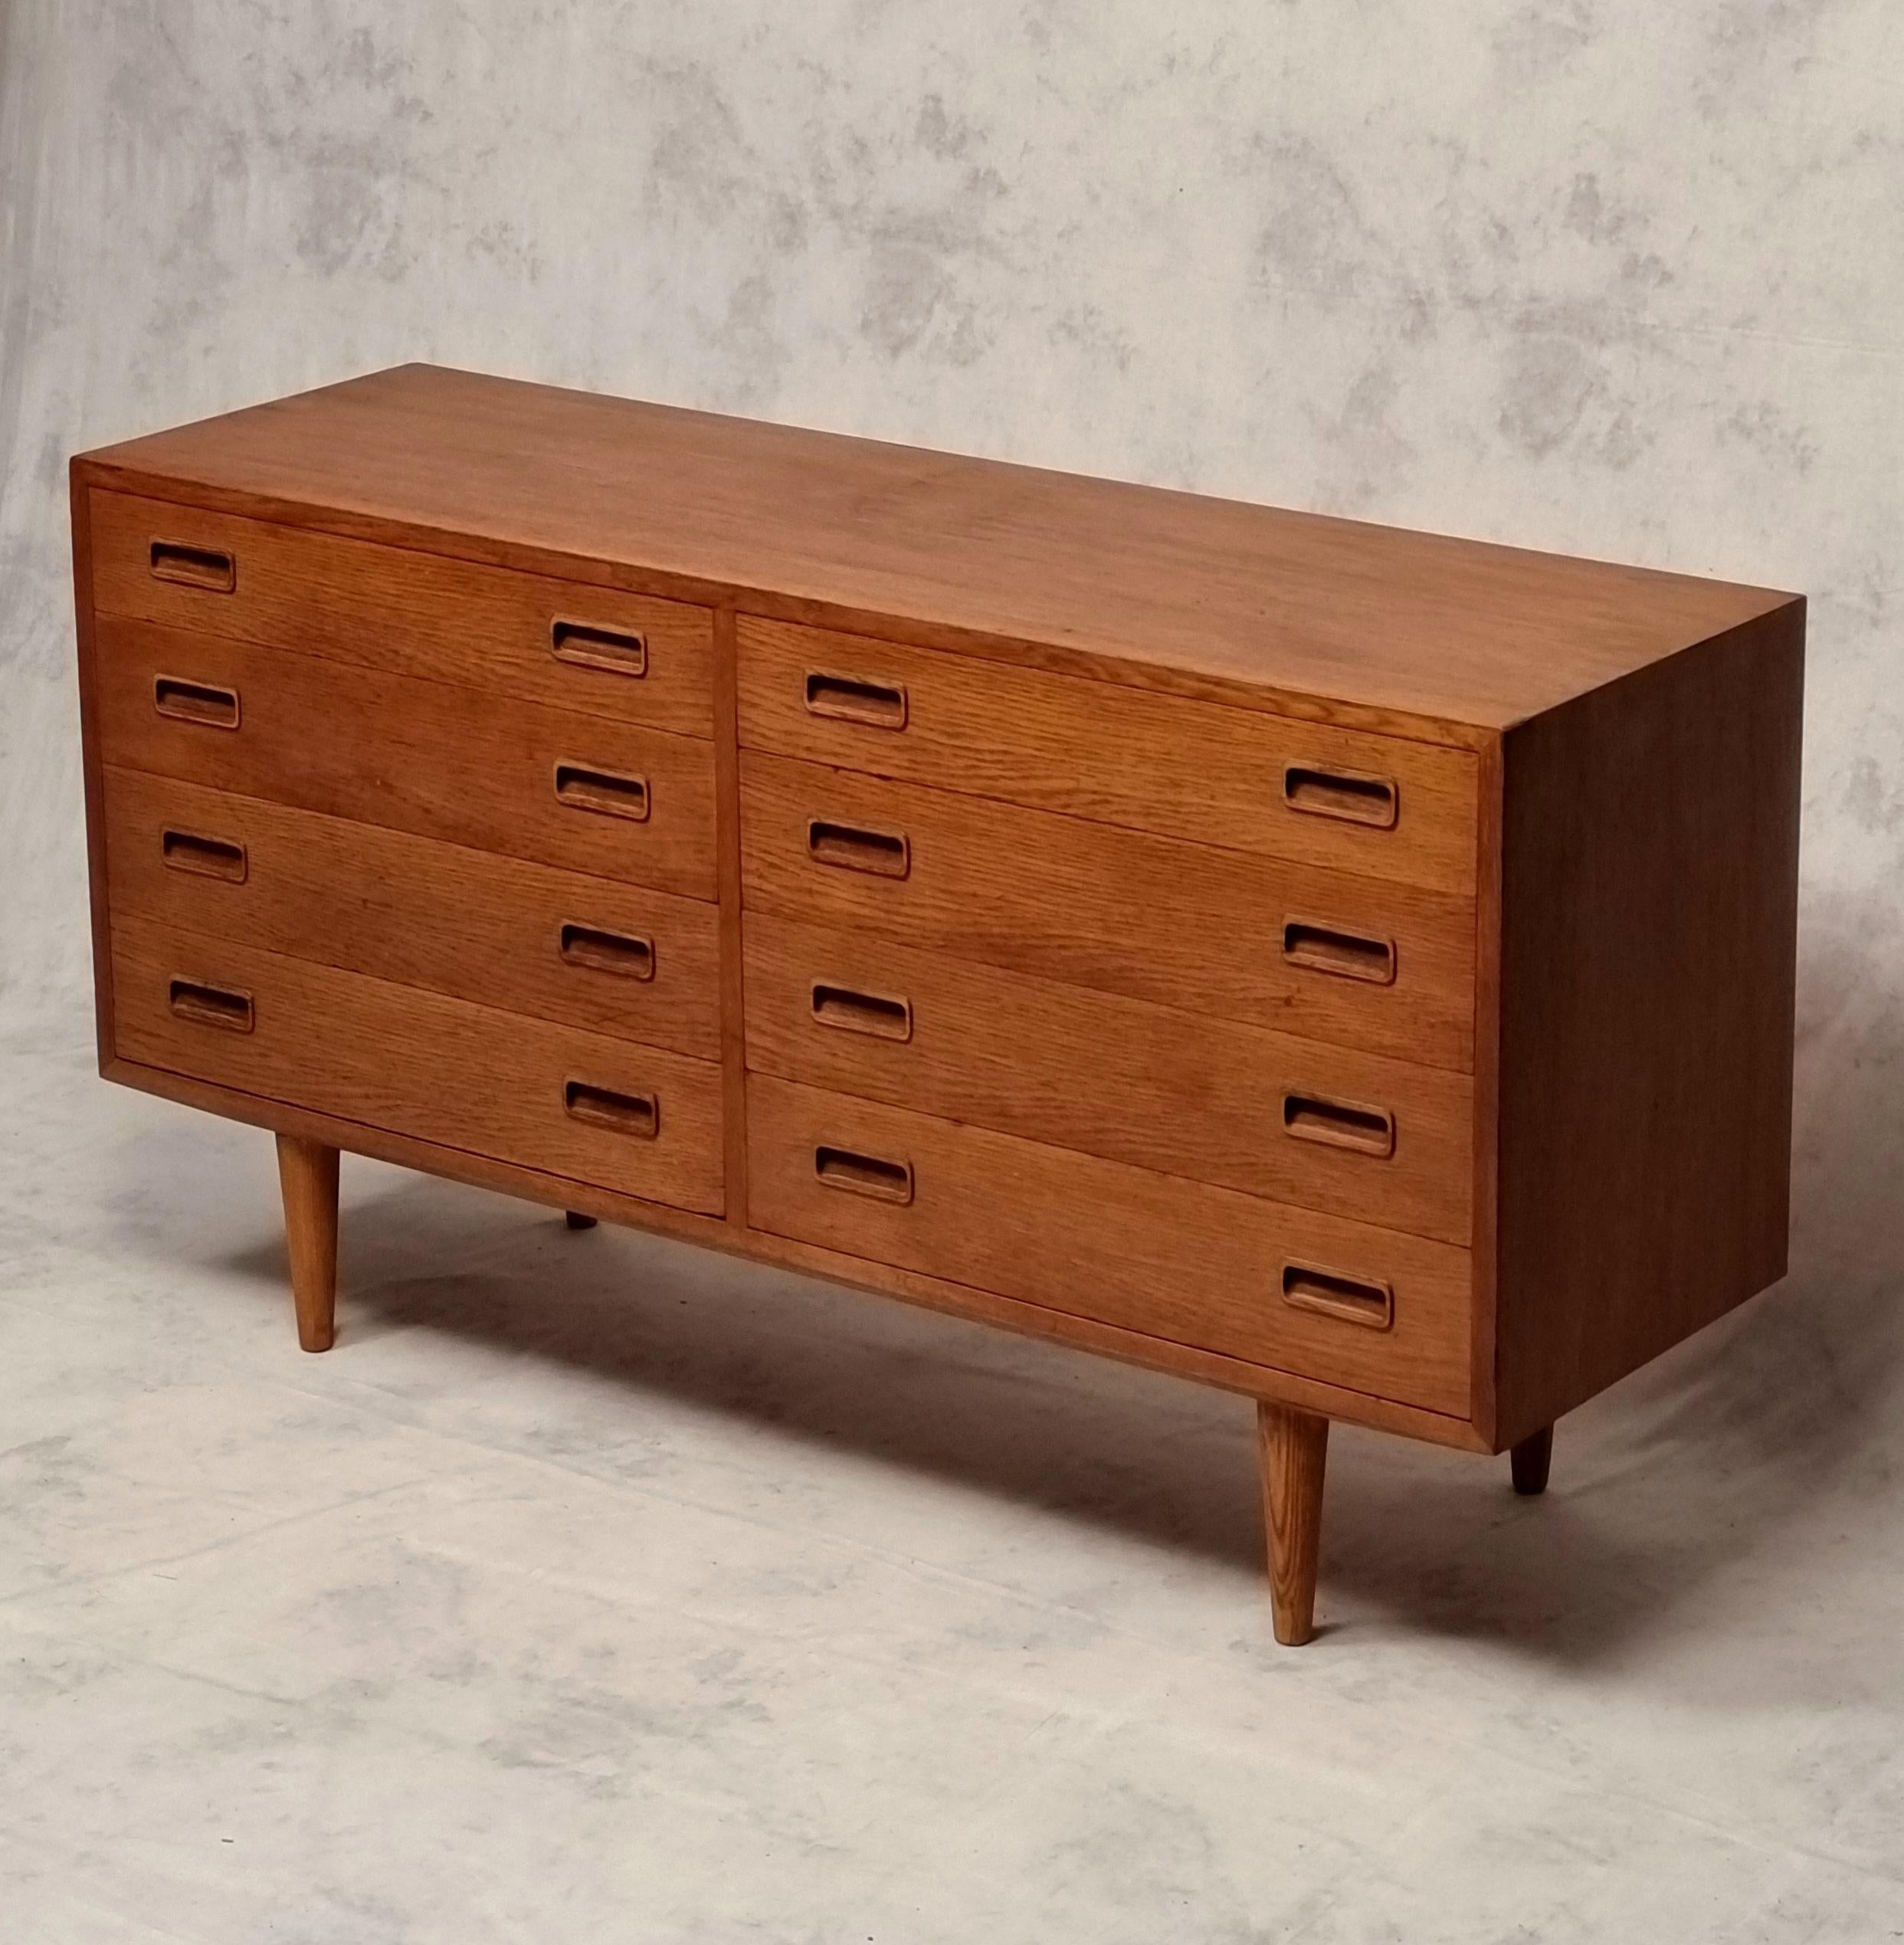 Scandinavian double chest of drawers by designer Carlo Jensen produced by Poul Hundevad and his company Hundevad & Co. Pretty light oak furniture from the 1960s, mid century modern, which has two rows of four drawers. It also rests on four oak legs.